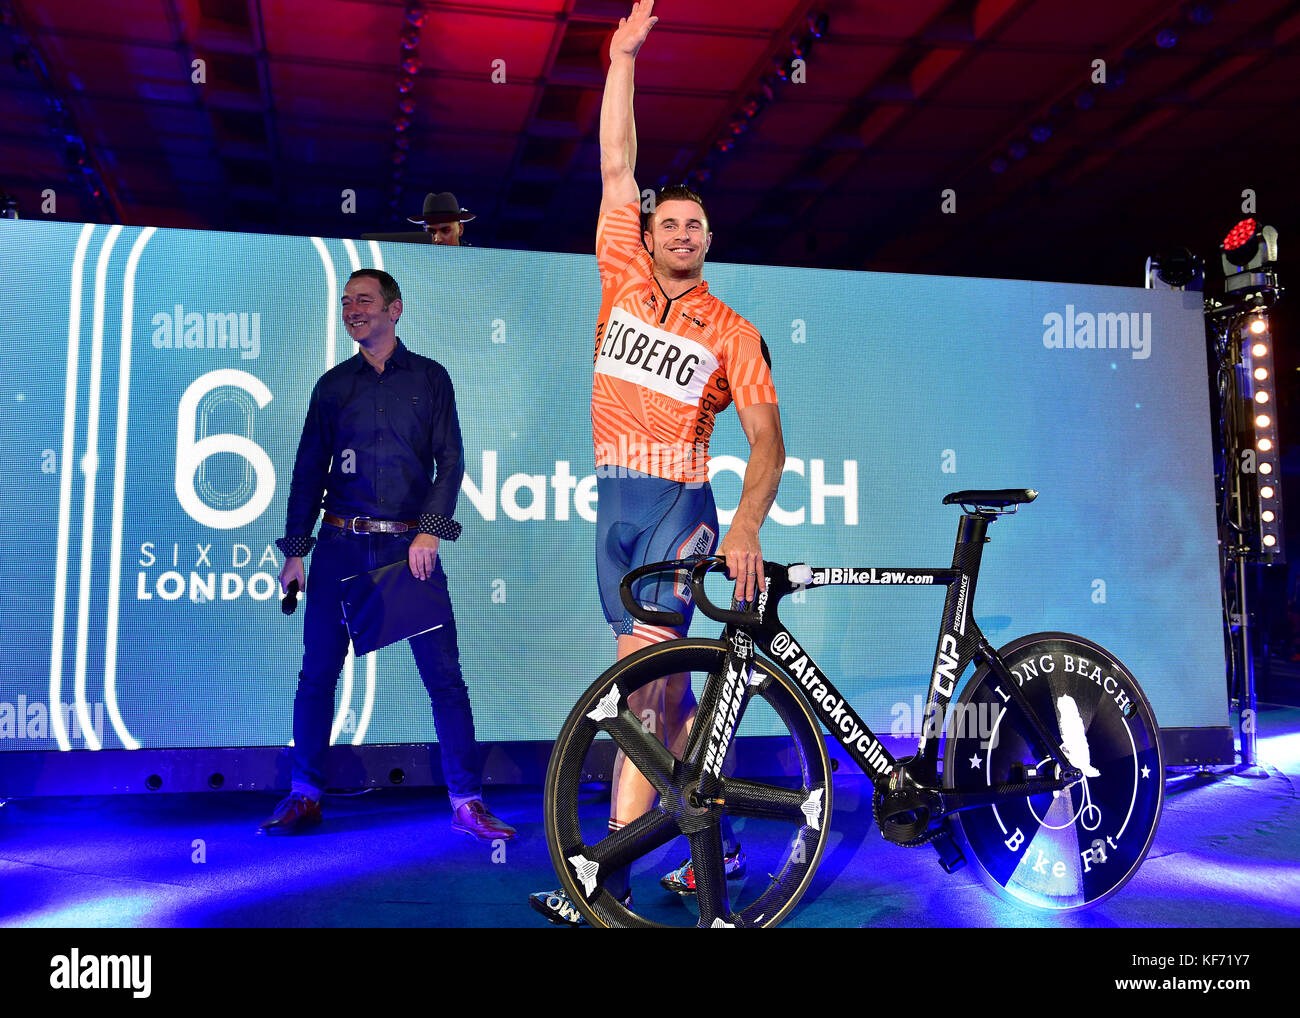 London, UK. 26th Oct, 2017. Nate Koch (USA) at Rider's Presentation during  Six Day London - day 3 event on Thursday, 26 October 2017, London England.  Credit: Taka Wu/Alamy Live News Stock Photo - Alamy